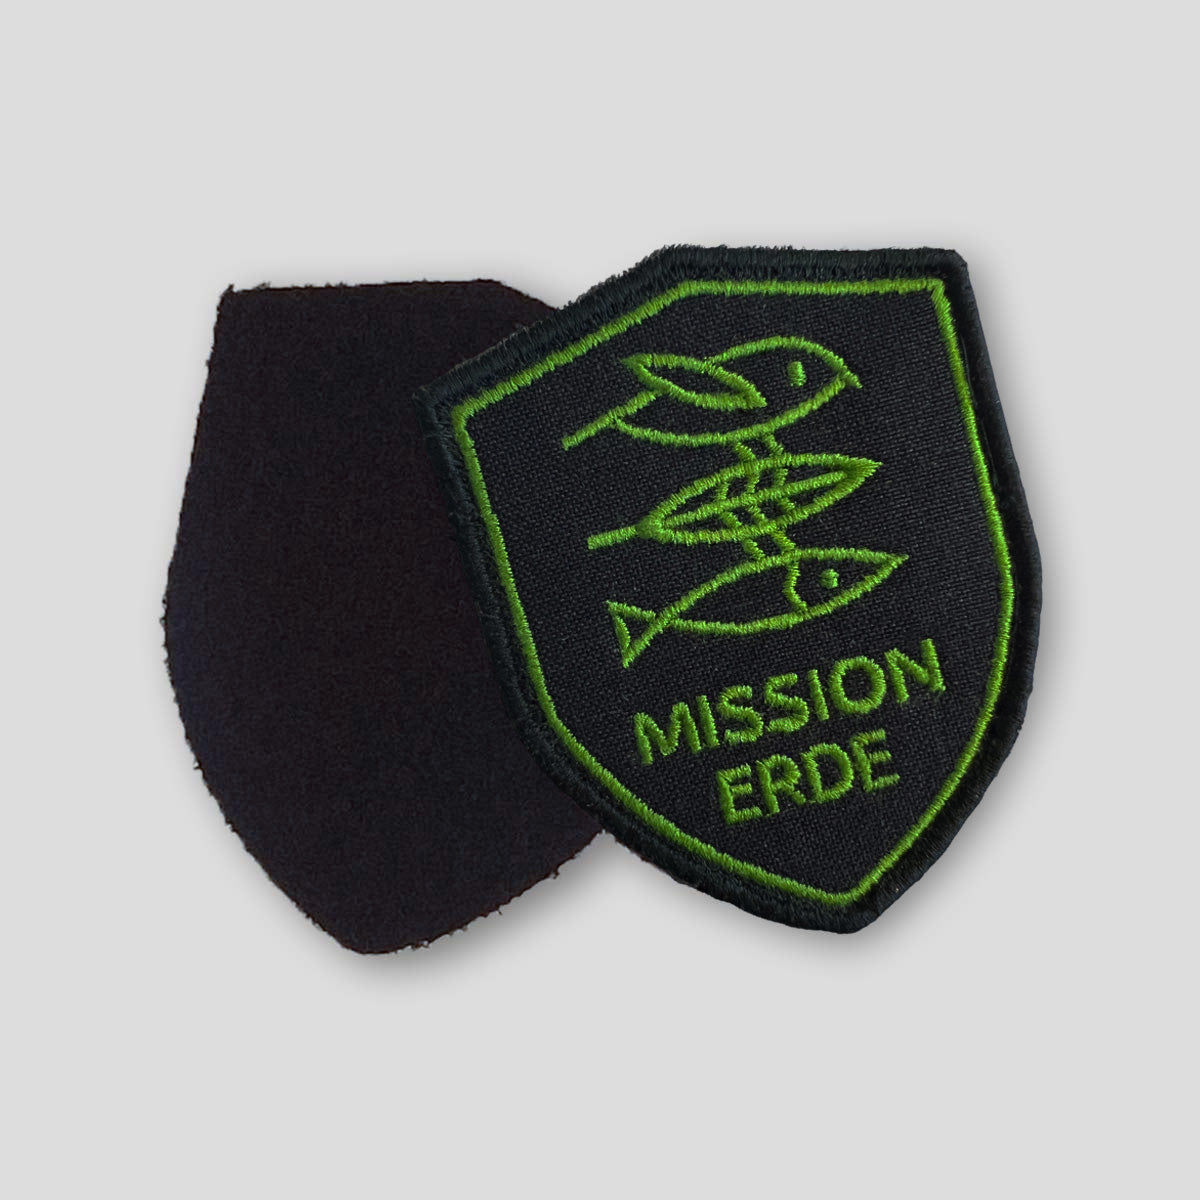 Patch "Mission Green"